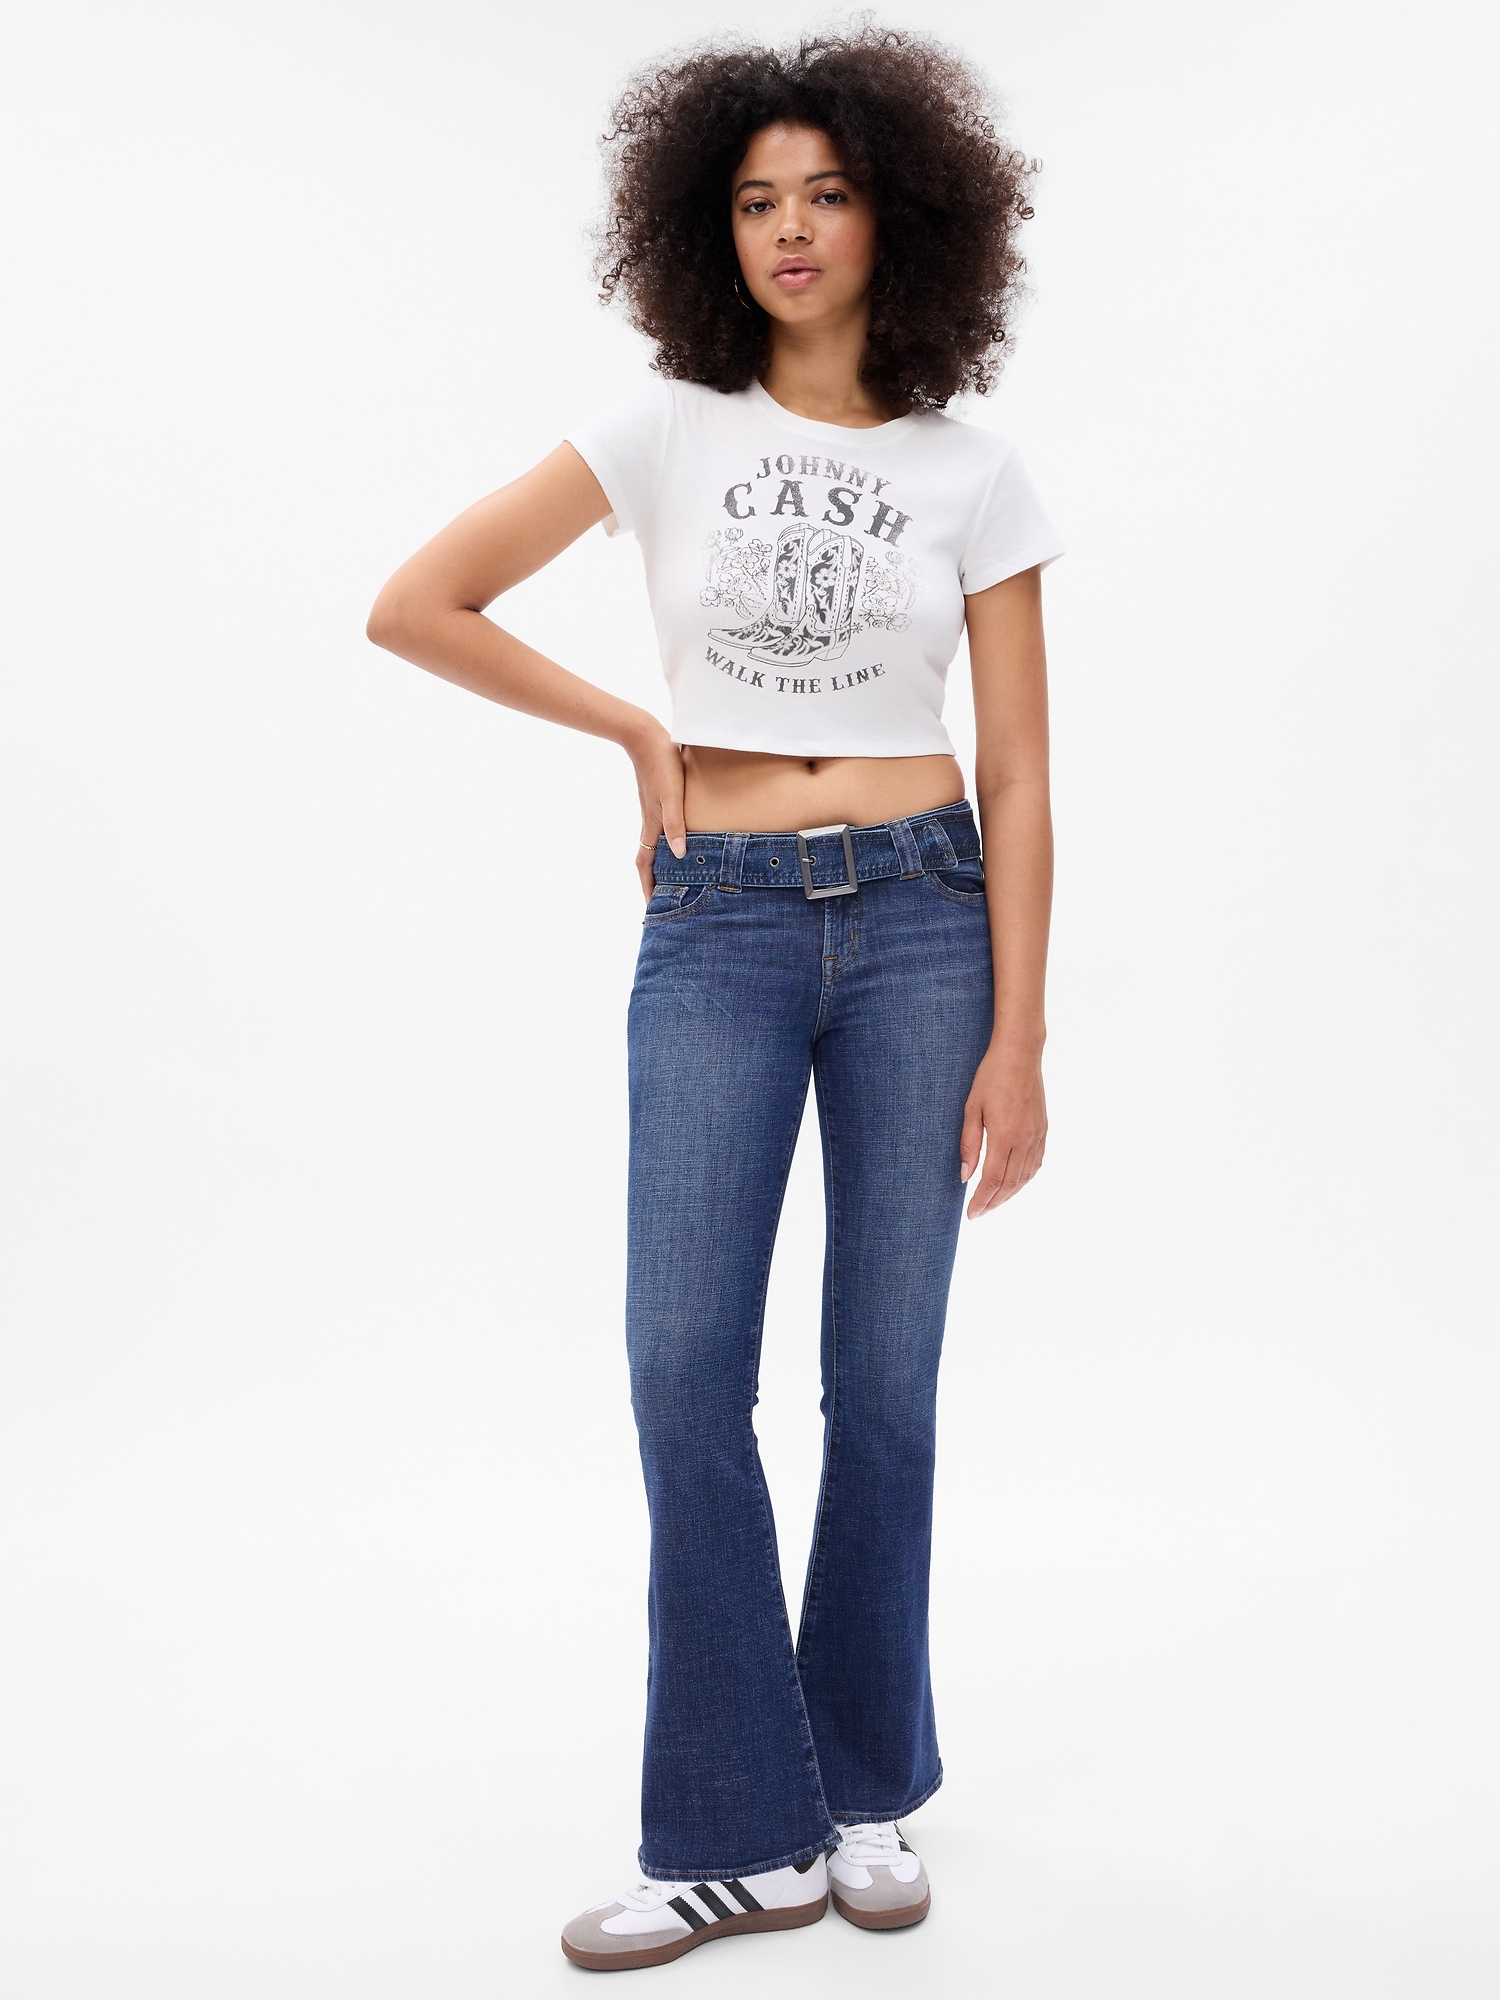 PROJECT GAP Low Rise Y2K Flare Jeans with Washwell | Gap